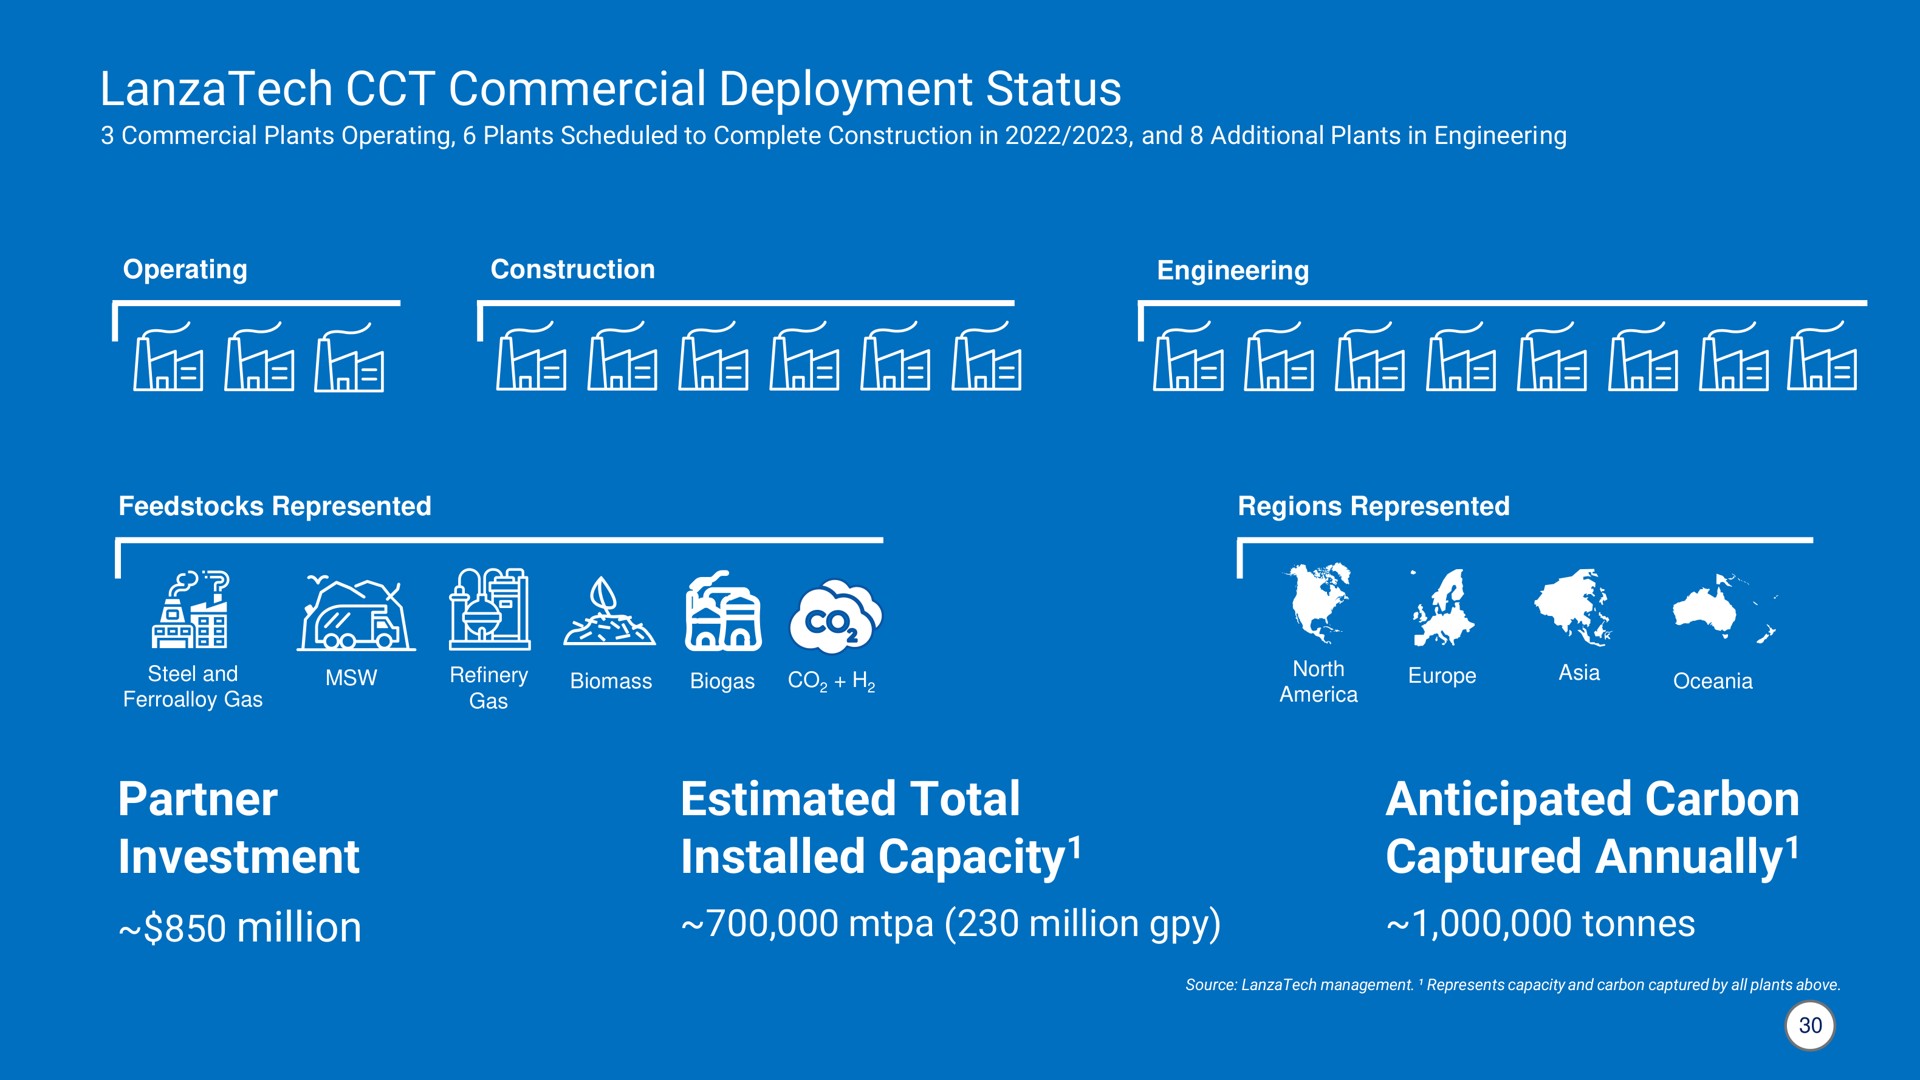 commercial deployment status partner investment million estimated total capacity anticipated carbon captured annually on sen see epee a eel capacity annually | LanzaTech